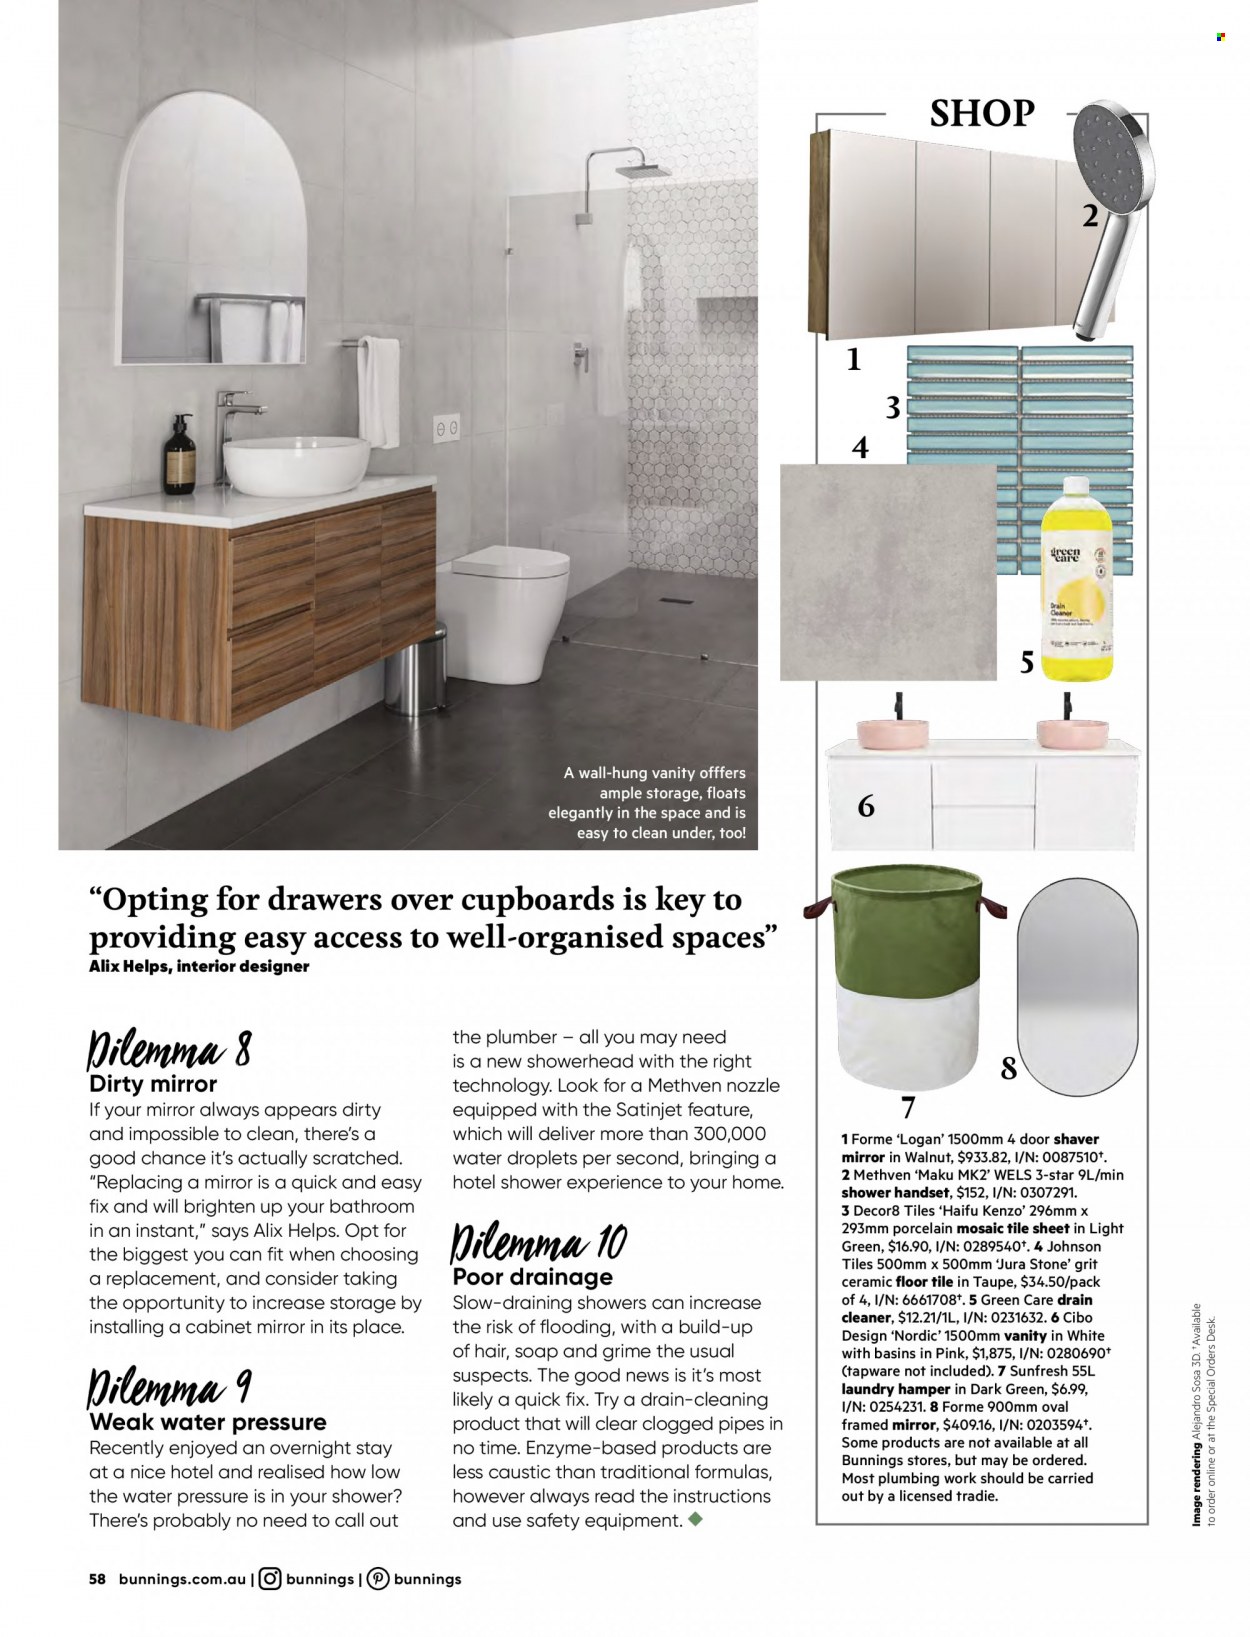 thumbnail - Bunnings Warehouse Catalogue - Sales products - showerhead, cabinet, vanity, desk, mirror, shaver, floor tile. Page 58.